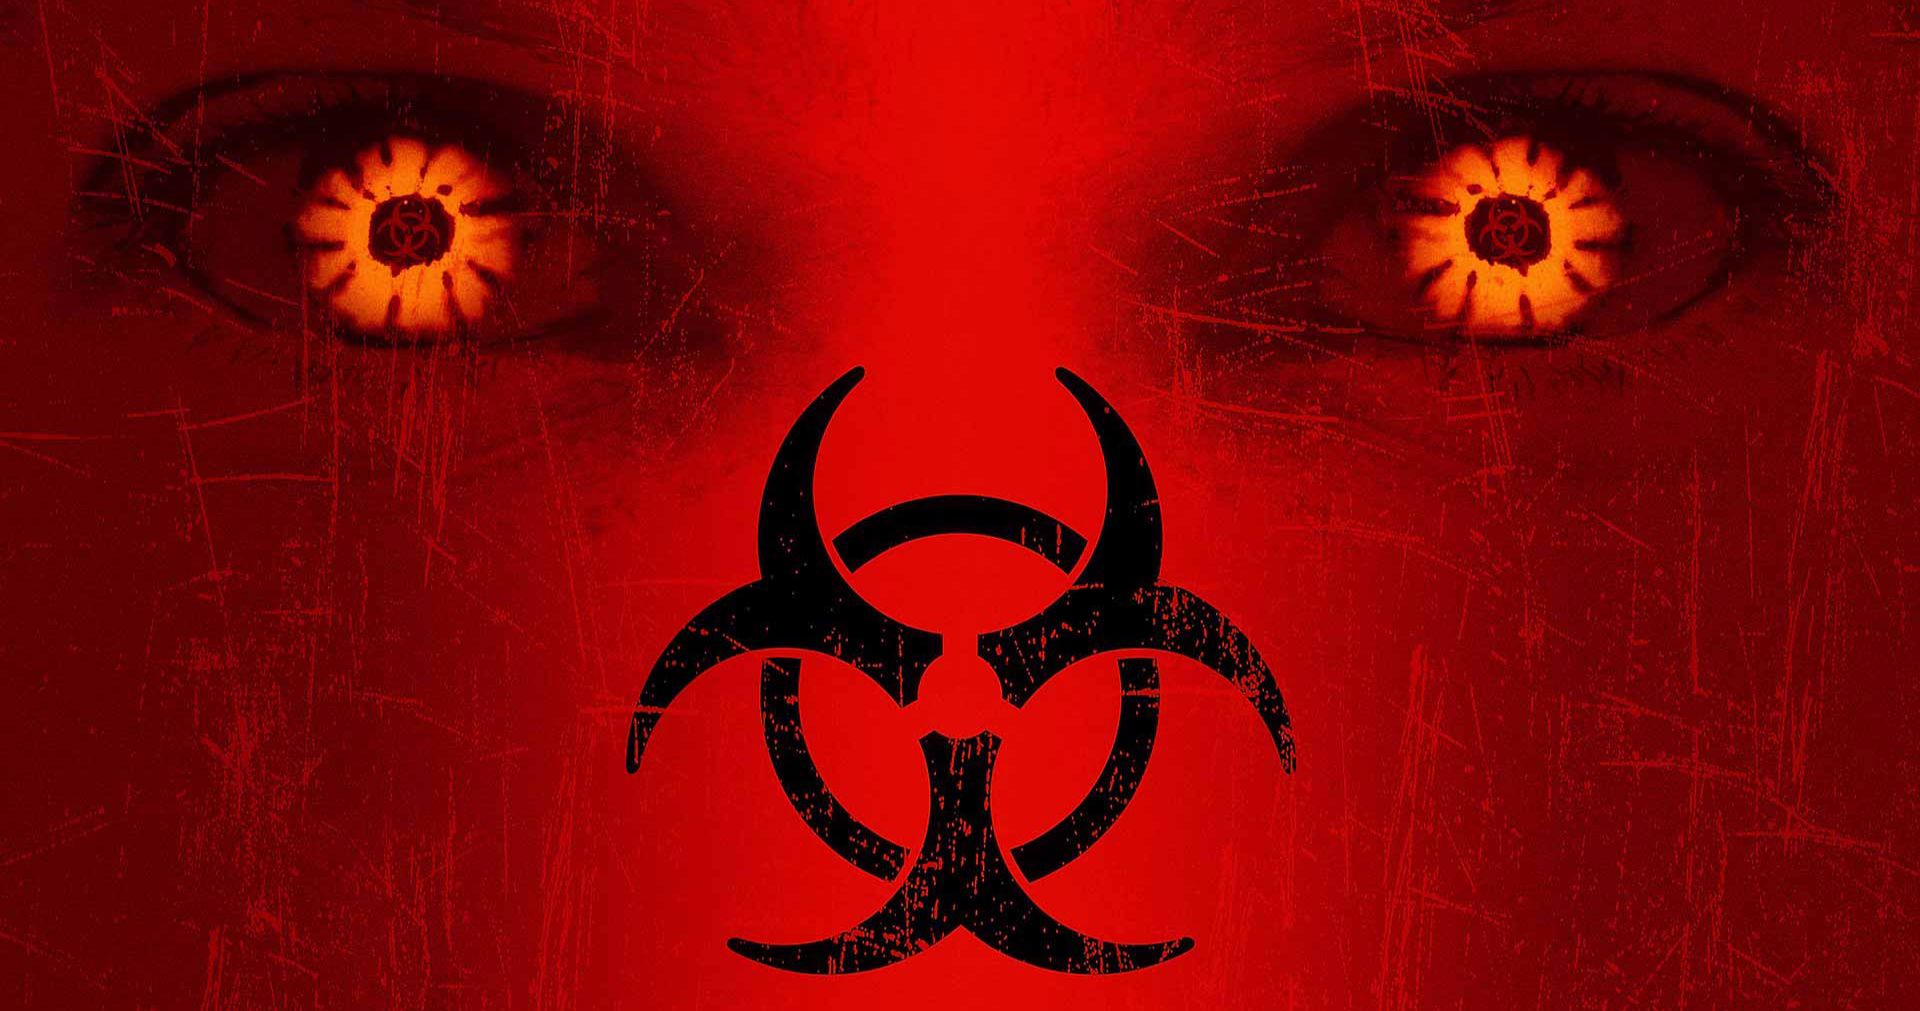 Third 28 Days Later Movie Is Being Planned by Original Director Danny Boyle